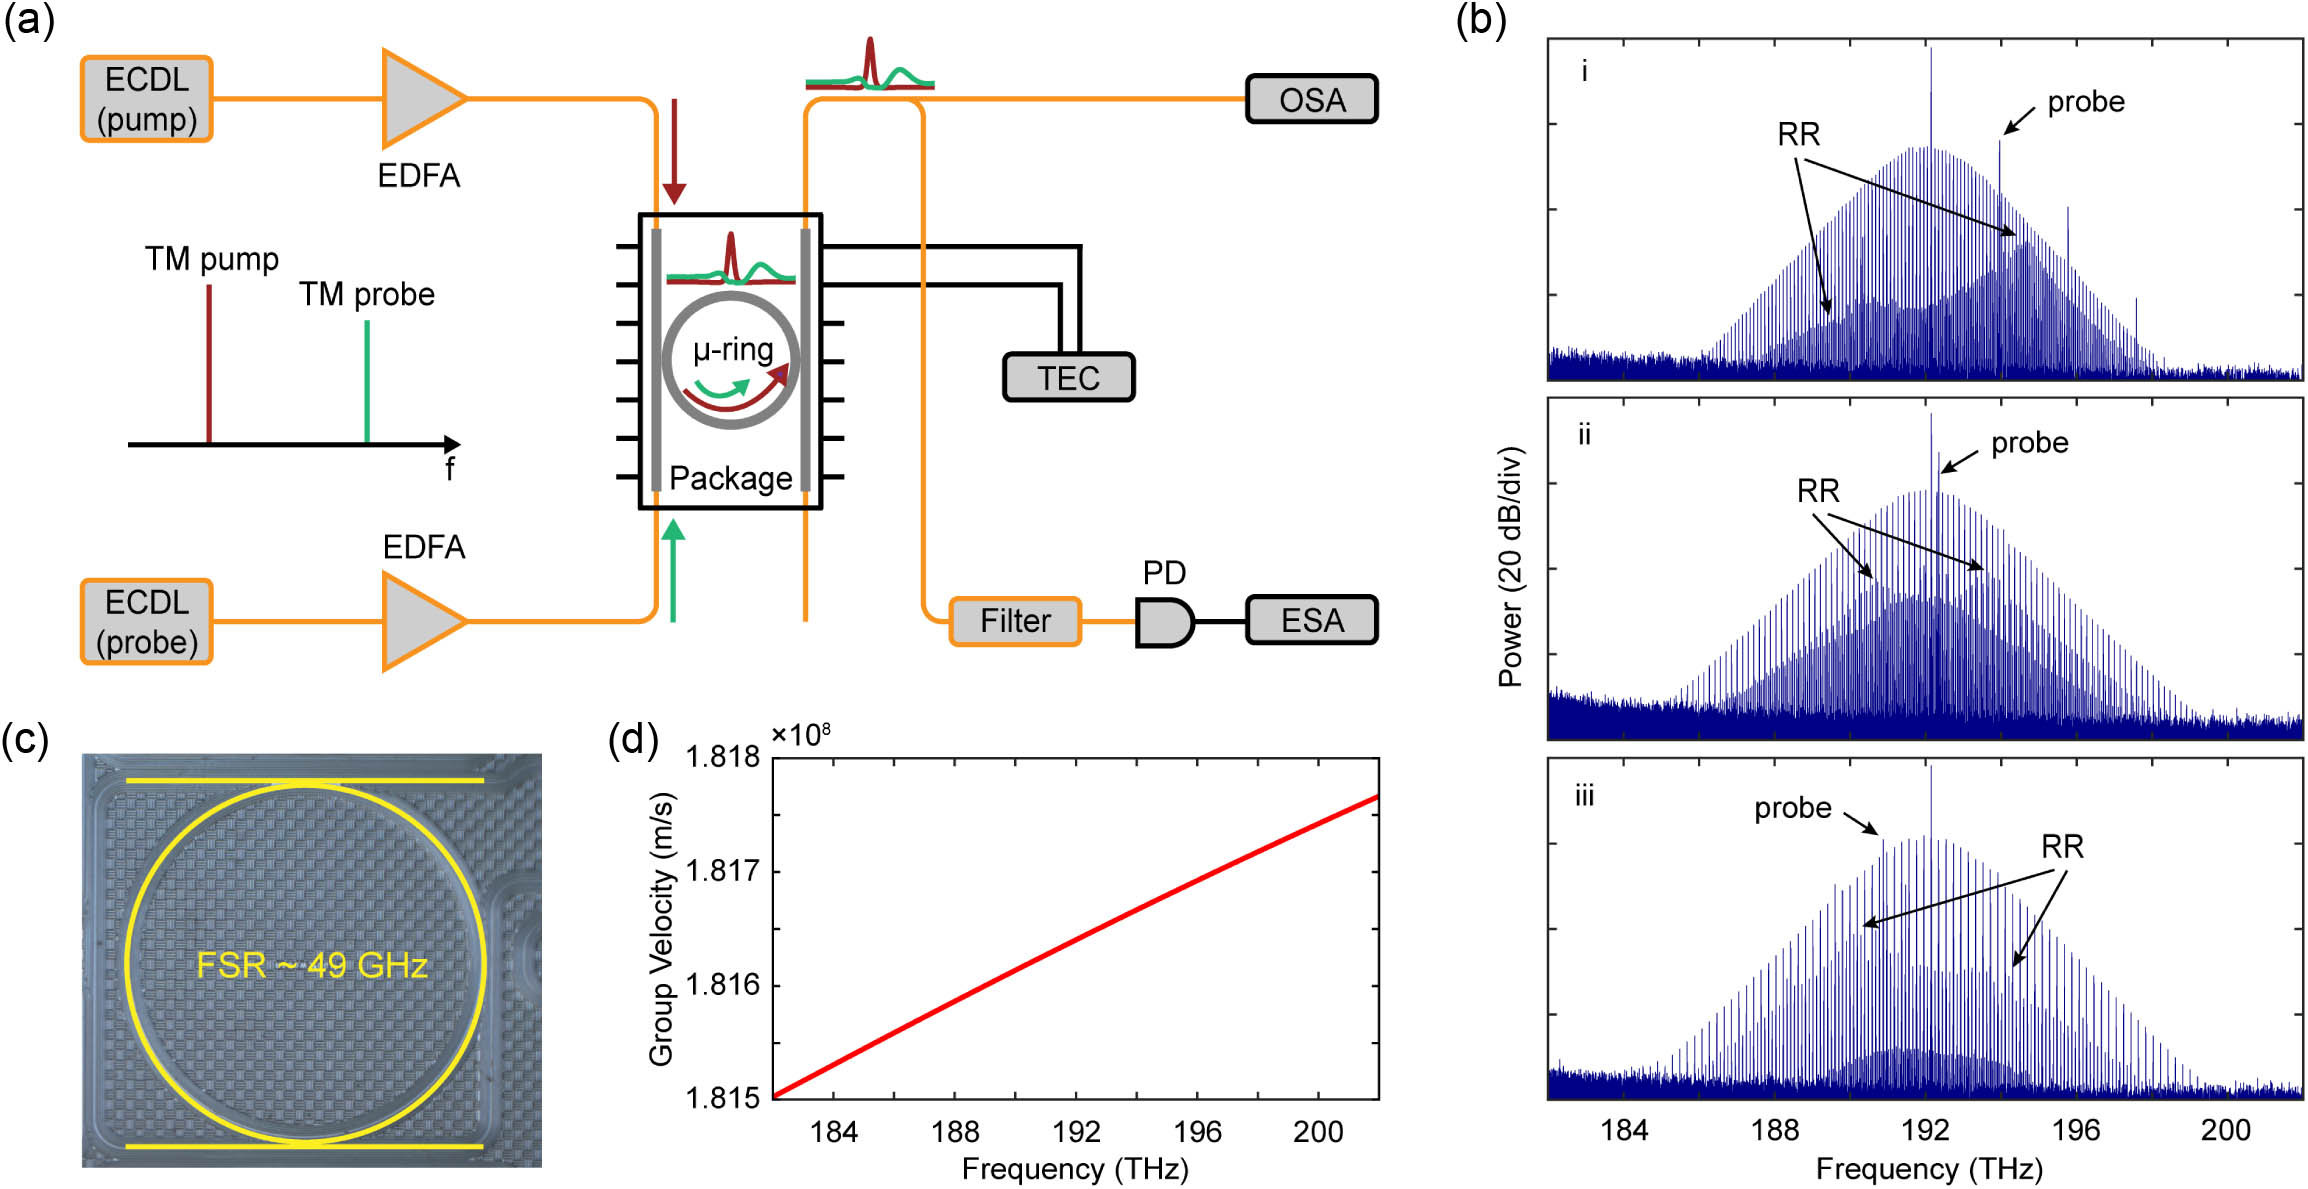 Experimental setup and results. (a) Schematic diagram of the experimental setup. (b) Measured optical spectra when the probe field has slower, similar, and faster group velocity, where the SMCs are used as pump for CMC generation. (c) Top view of MRR. (d) Calculated group velocity of the MRR.